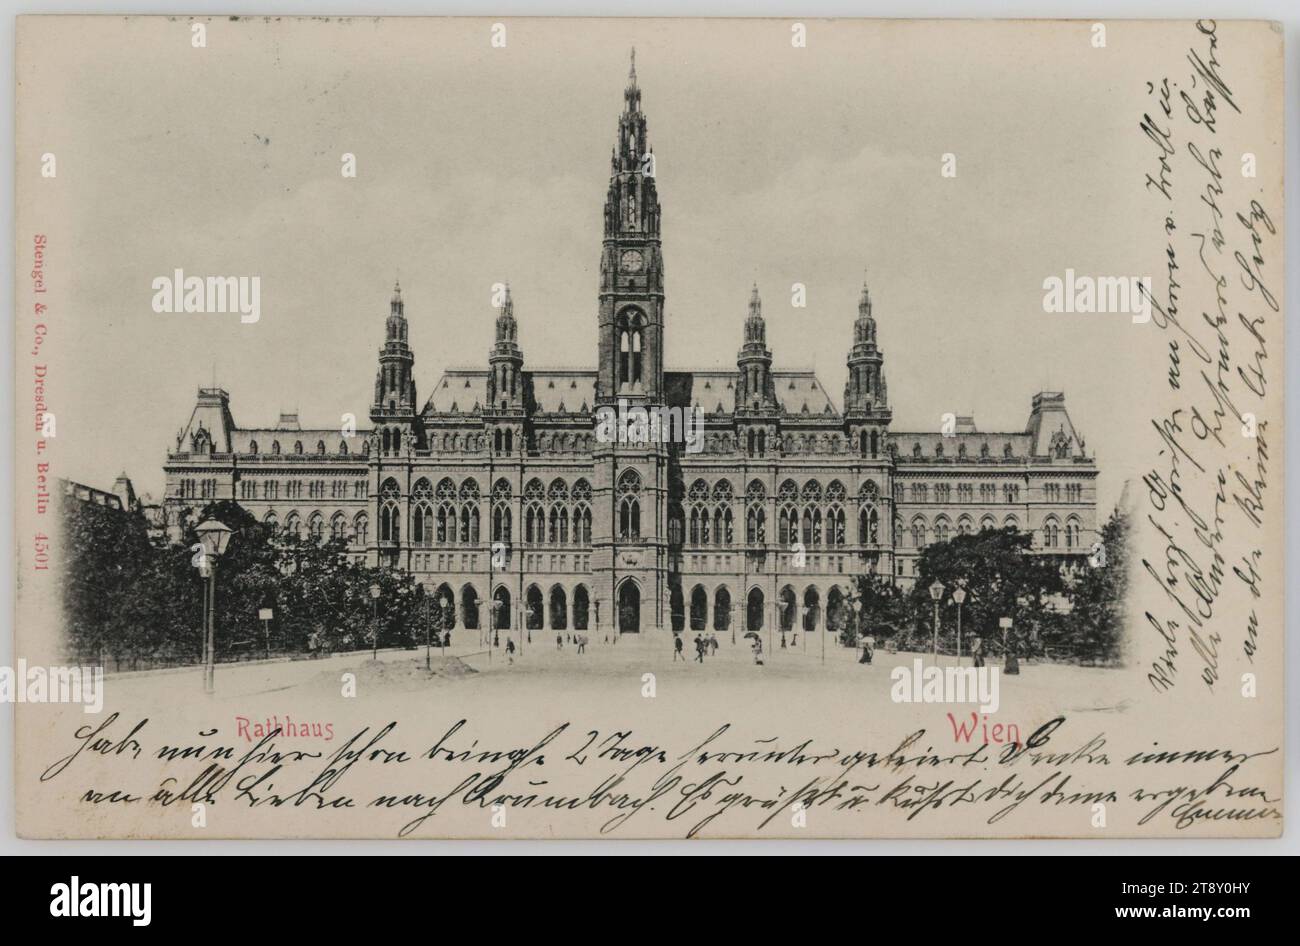 Rathhaus Wien, Stengel & Co., Dresden, Producer, 1901, paperboard, Collotype, Inscription, FROM, Wien, TO, Krumbach, ADDRESS, Hochwolgeboren Frau, Lindenhof, Krumbach bei Edlitz, N. Oest., MESSAGE, Have been reading here for almost 2 days now. Always think of all loved ones to Krumbach. Greetings and kisses from your devoted Emma, Many heartfelt greetings to Mr. Troll and your family. Greetings to Mr. Troll and all others. Especially many kisses to dear little Hedy, Attractions, Ringstraße, Media and Communication, Postcards with transliteration, 1st District: Innere Stadt, townhall Stock Photo